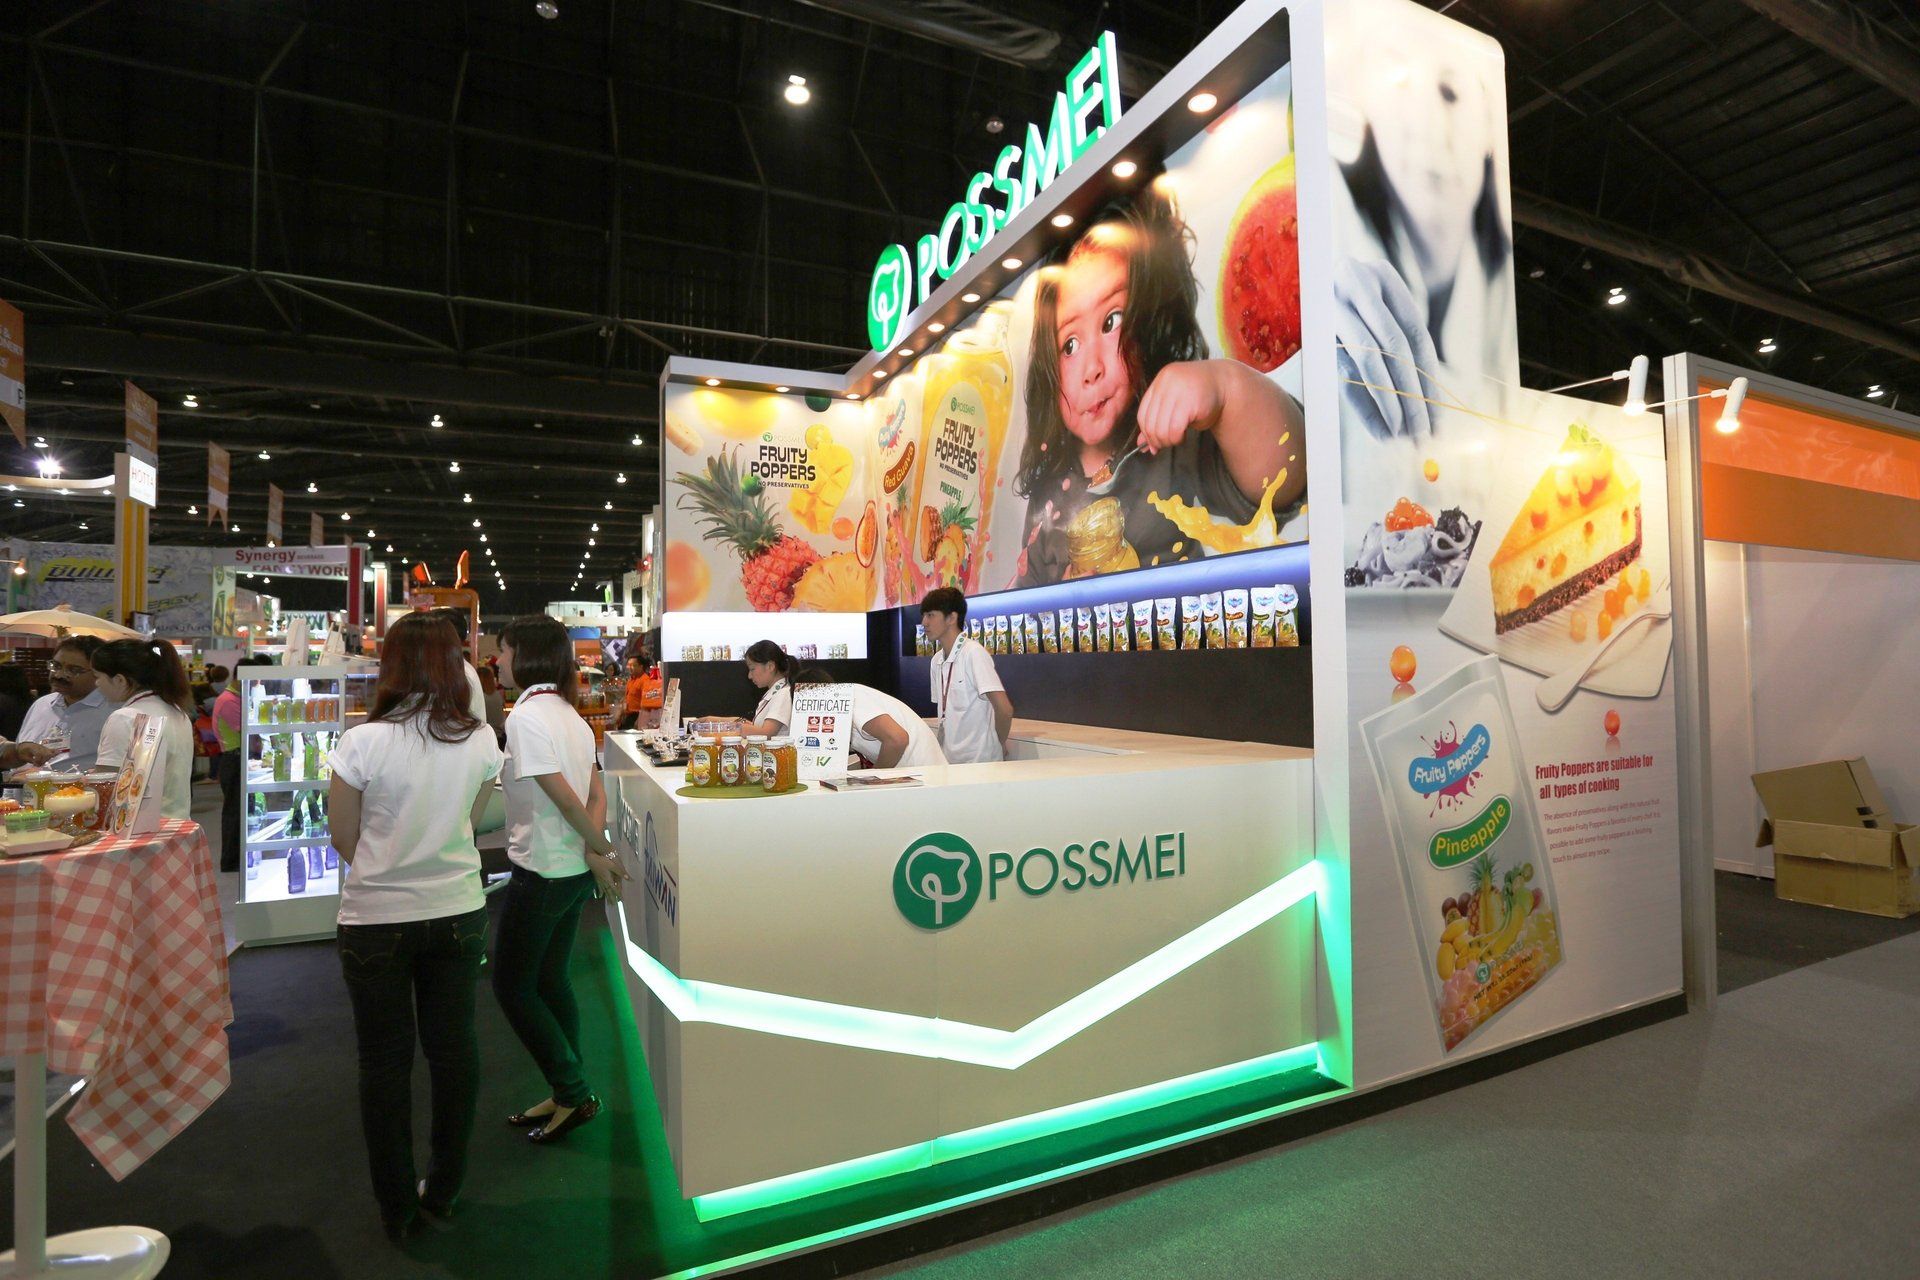 Possmei @ Thaifex 2014. Booth designed and built be Essential Global Fairs.